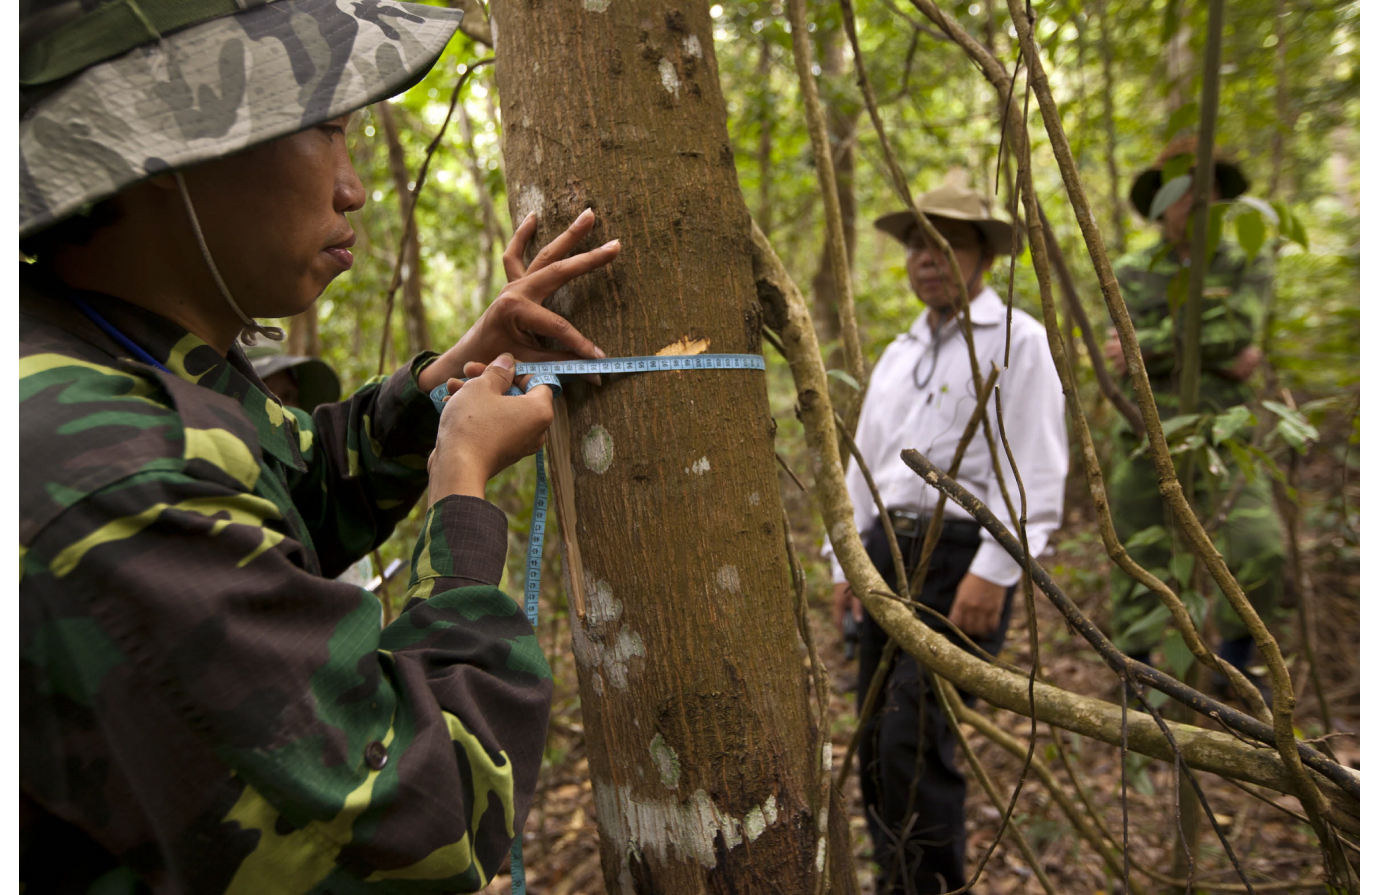 Learning from experiences to increase forest data transparency for climate action